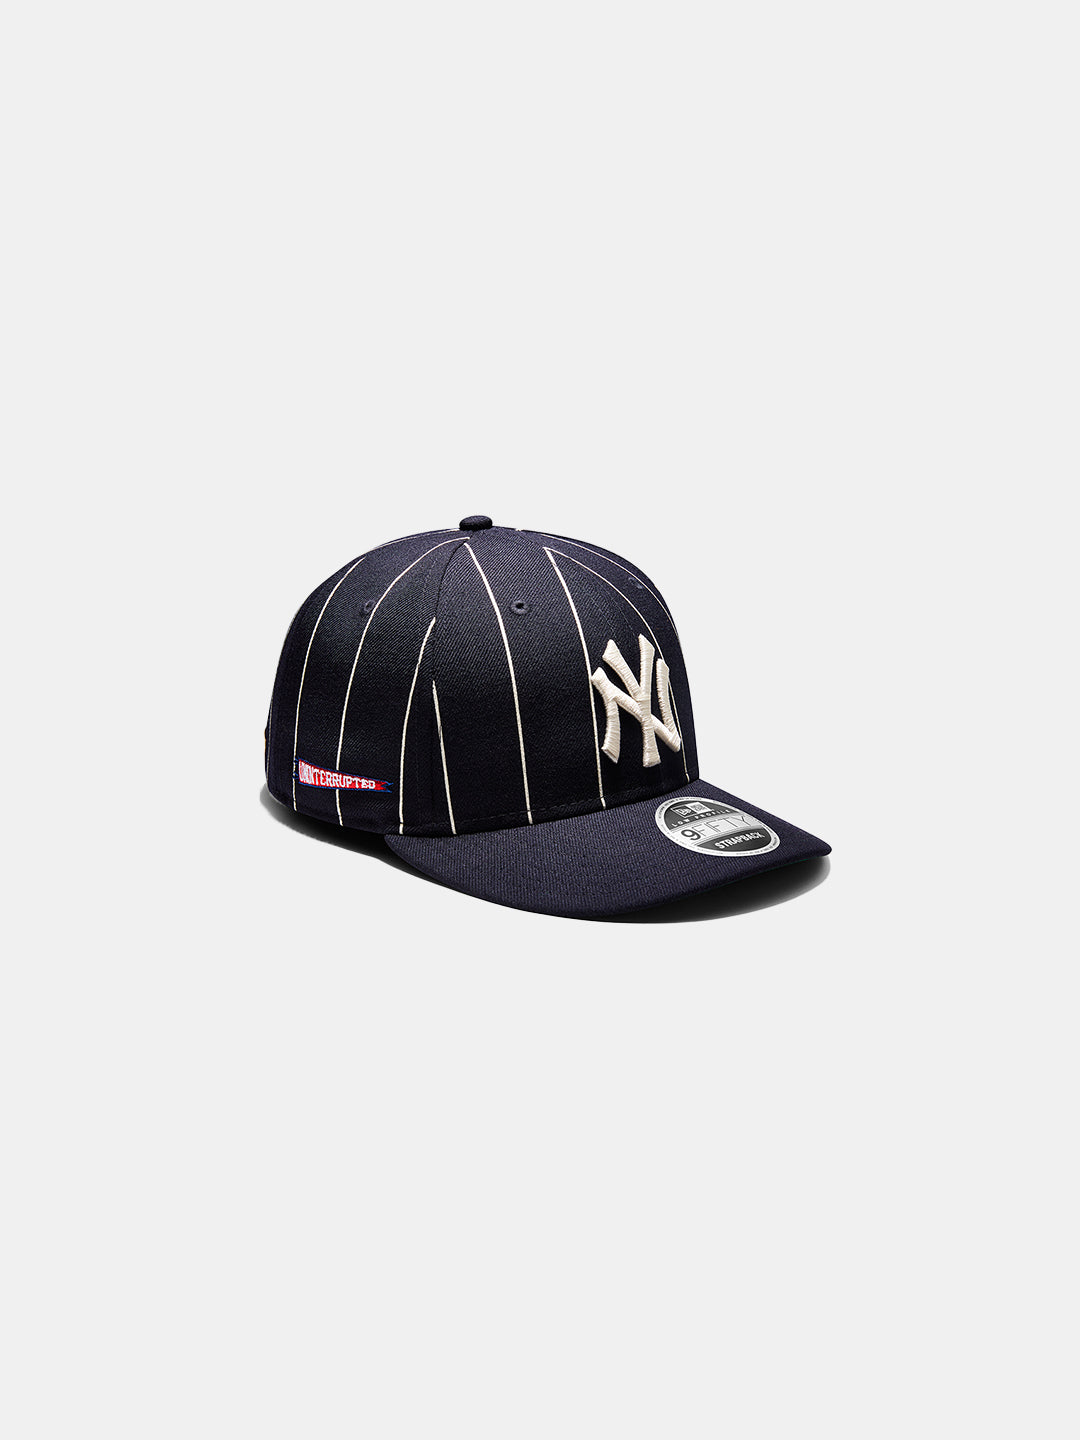 NY Yankees X Store – Low Uninterrupted Profile | UNINTERRUPTED® UNINTERRUPTED 9FIFTY